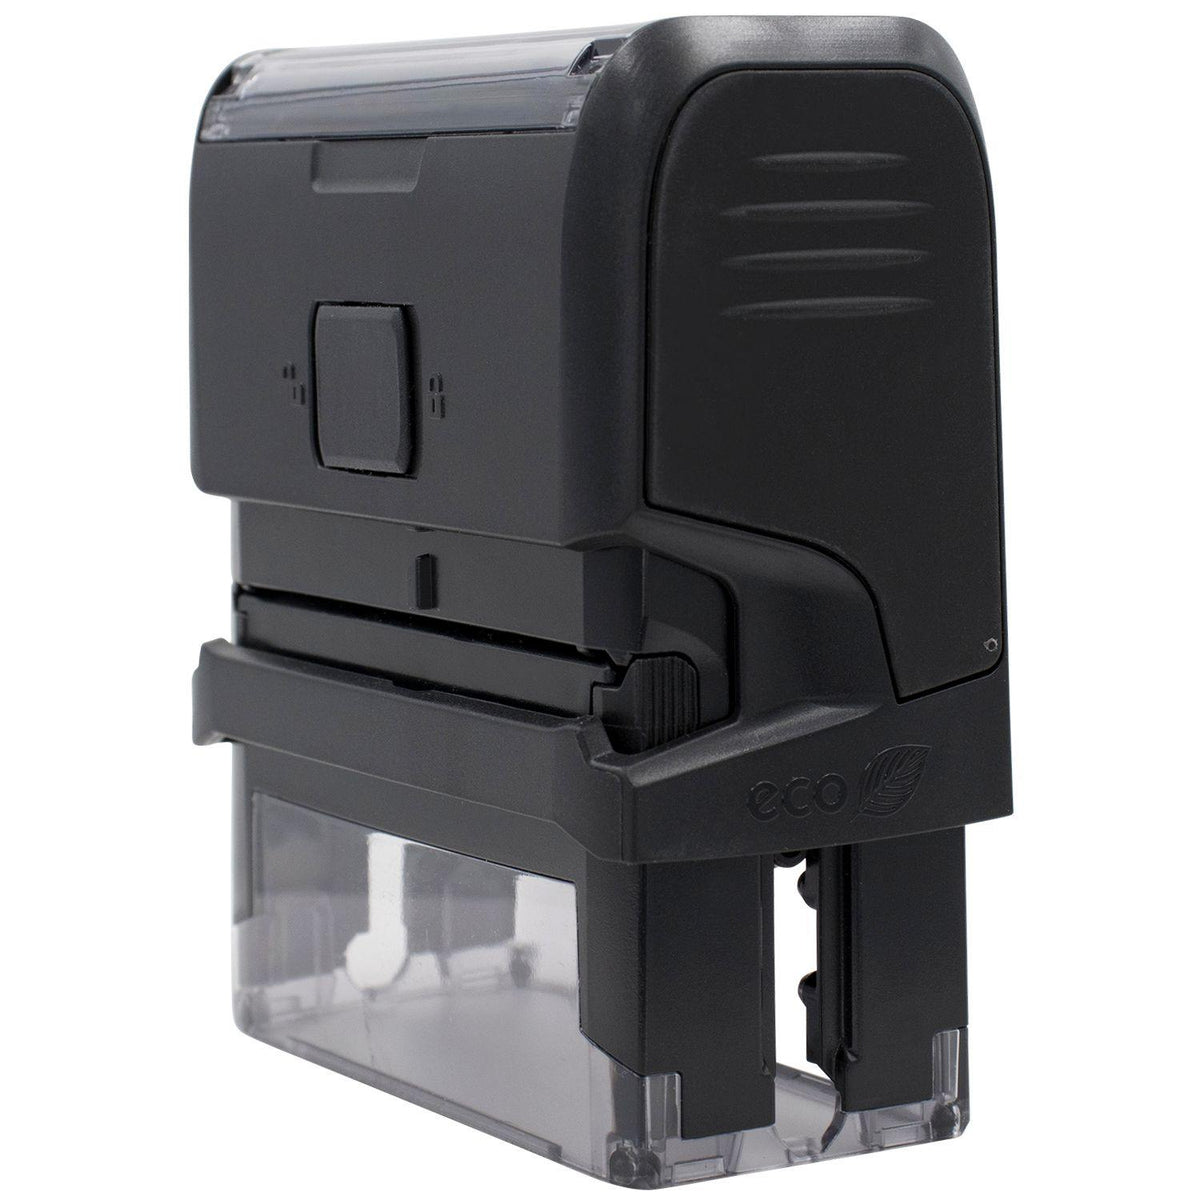 Side View of Large Self Inking Air Mail Stamp at an Angle